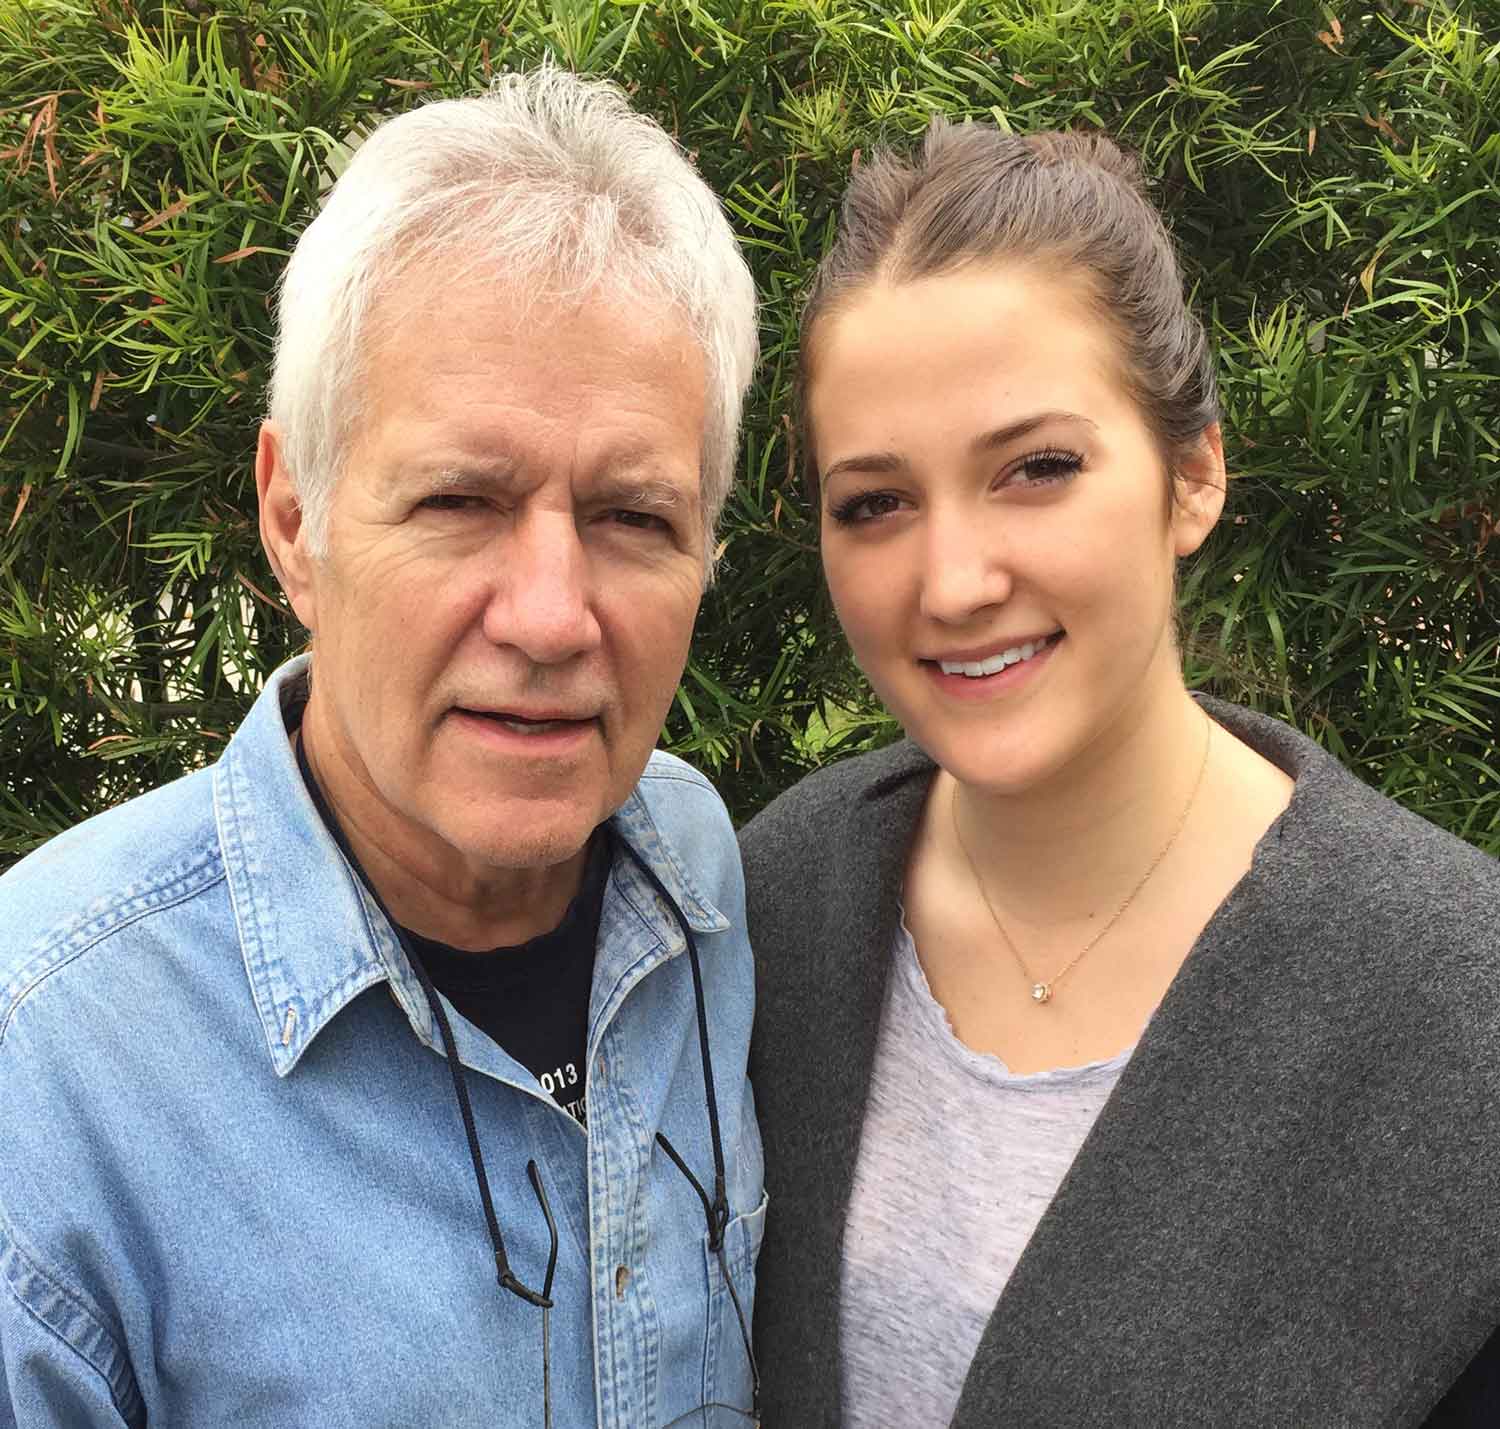 Ale Trebek with his daughter, Emily trebek